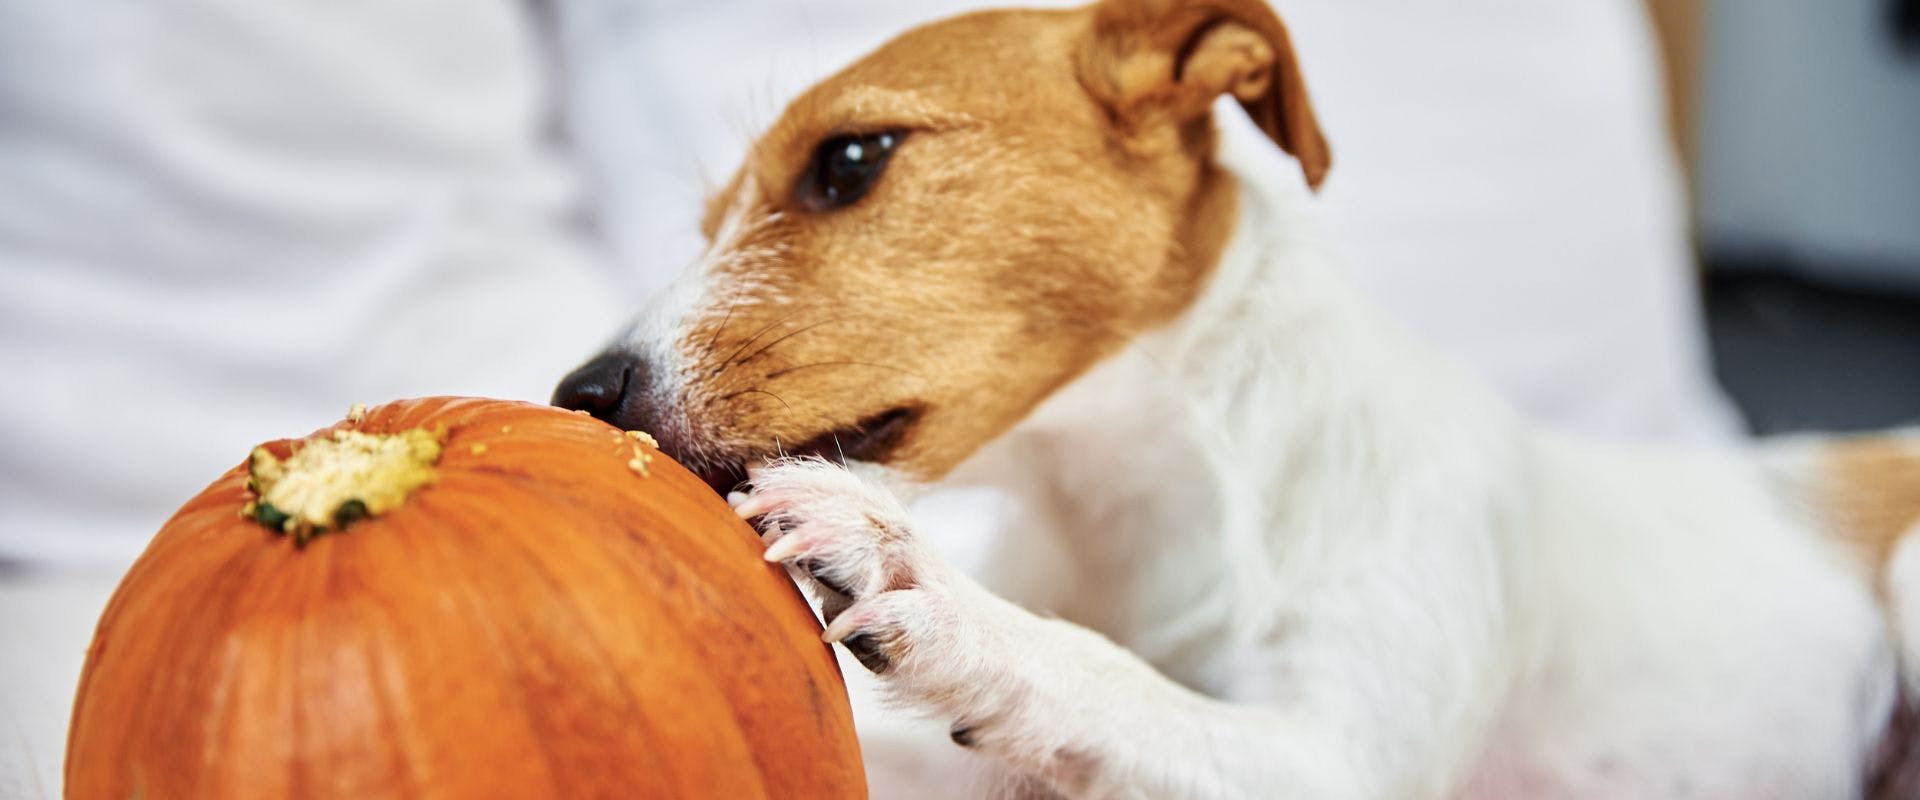 Jack Russell dog eating squash